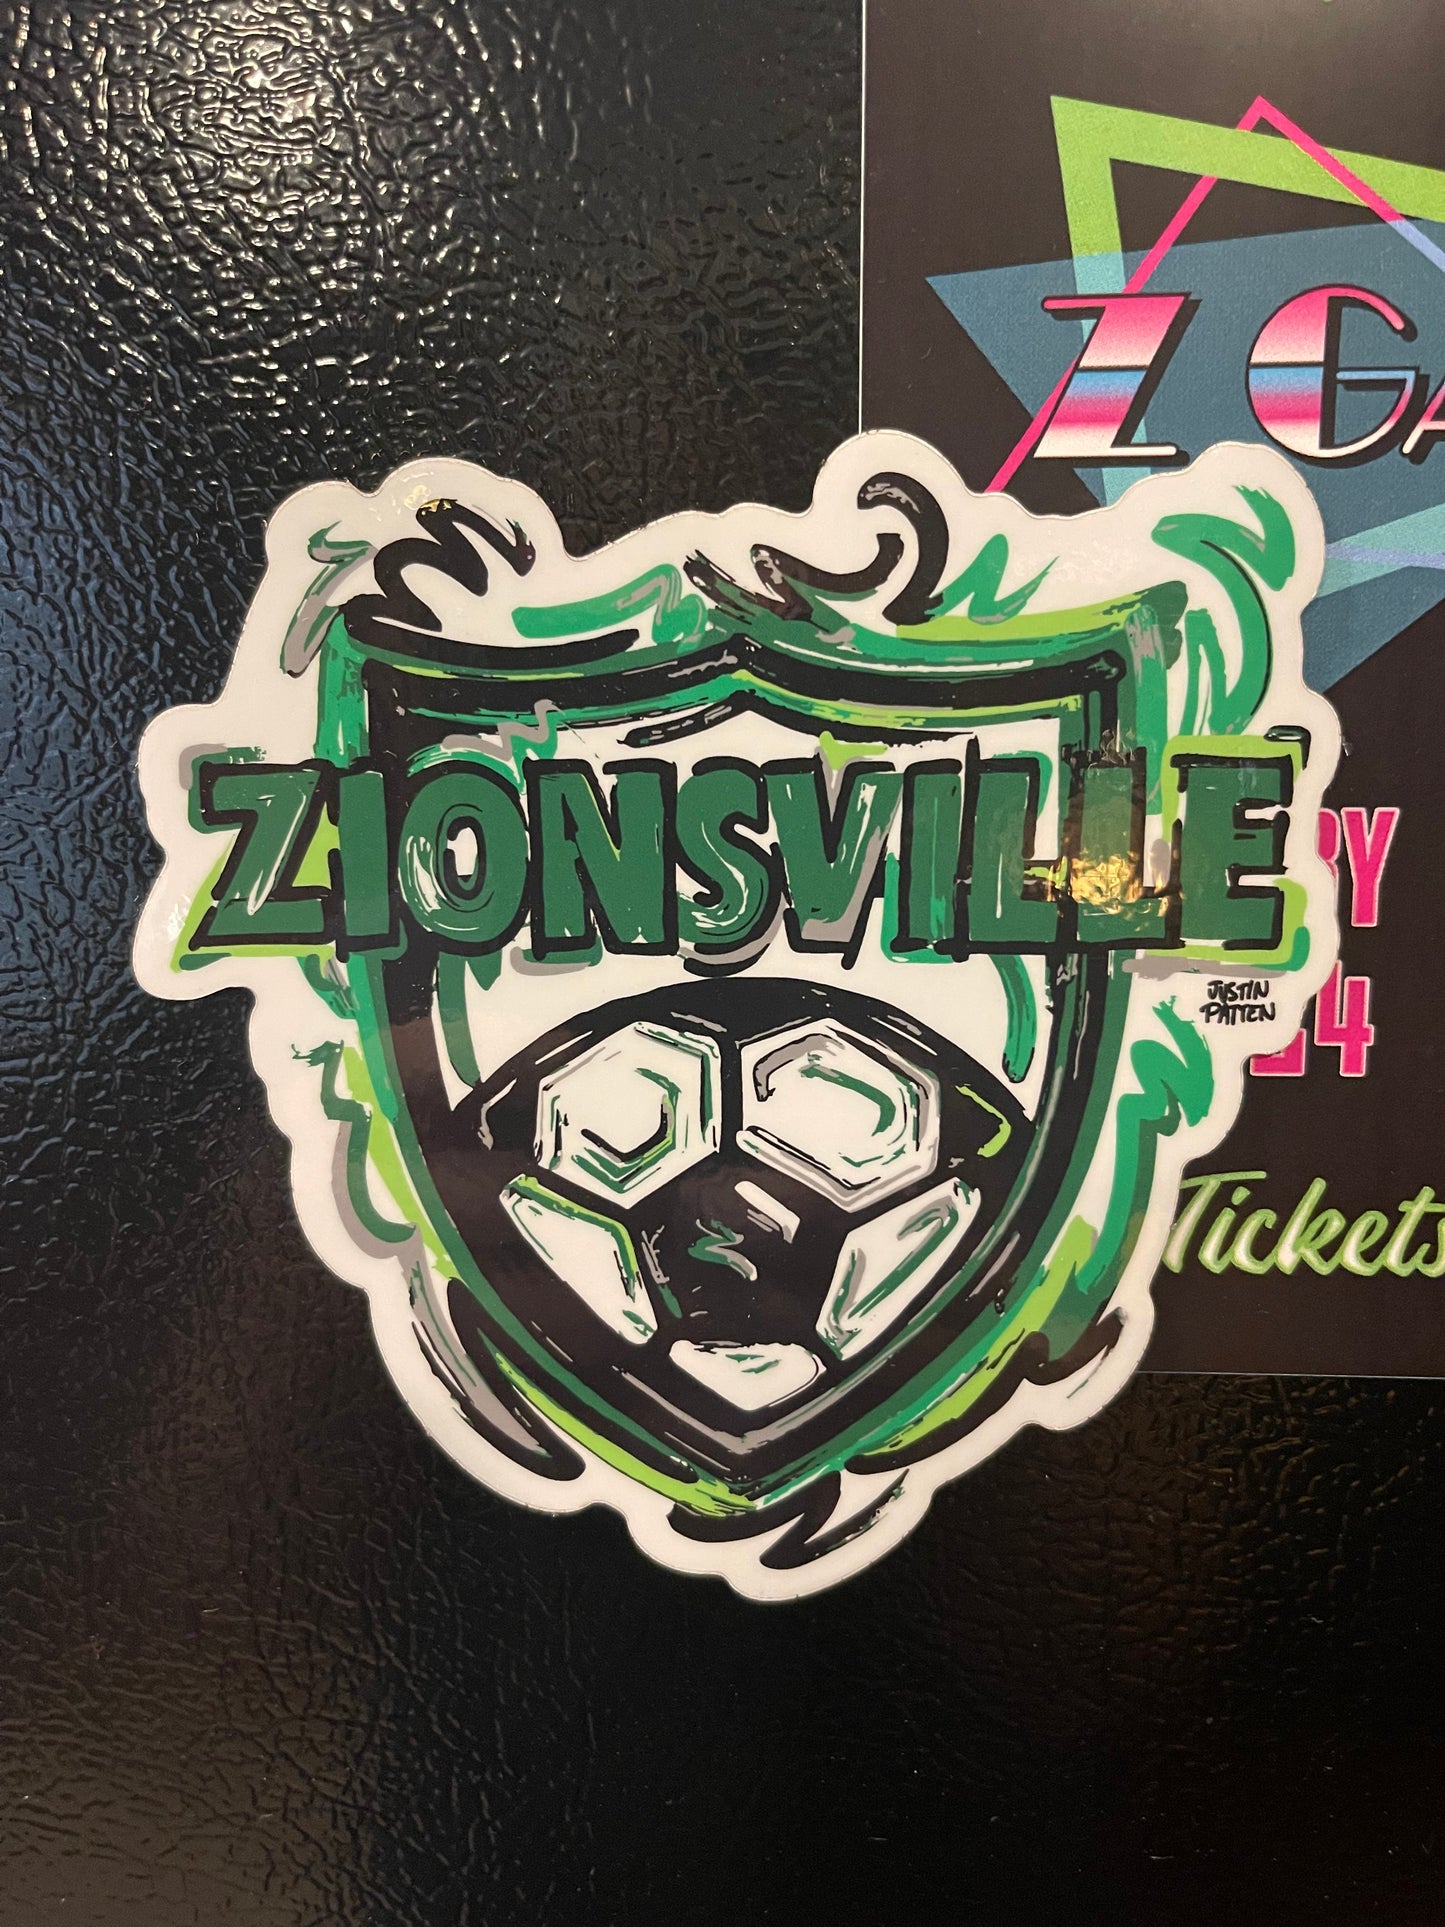 Zionsville Indiana Soccer Magnet by Justin Patten